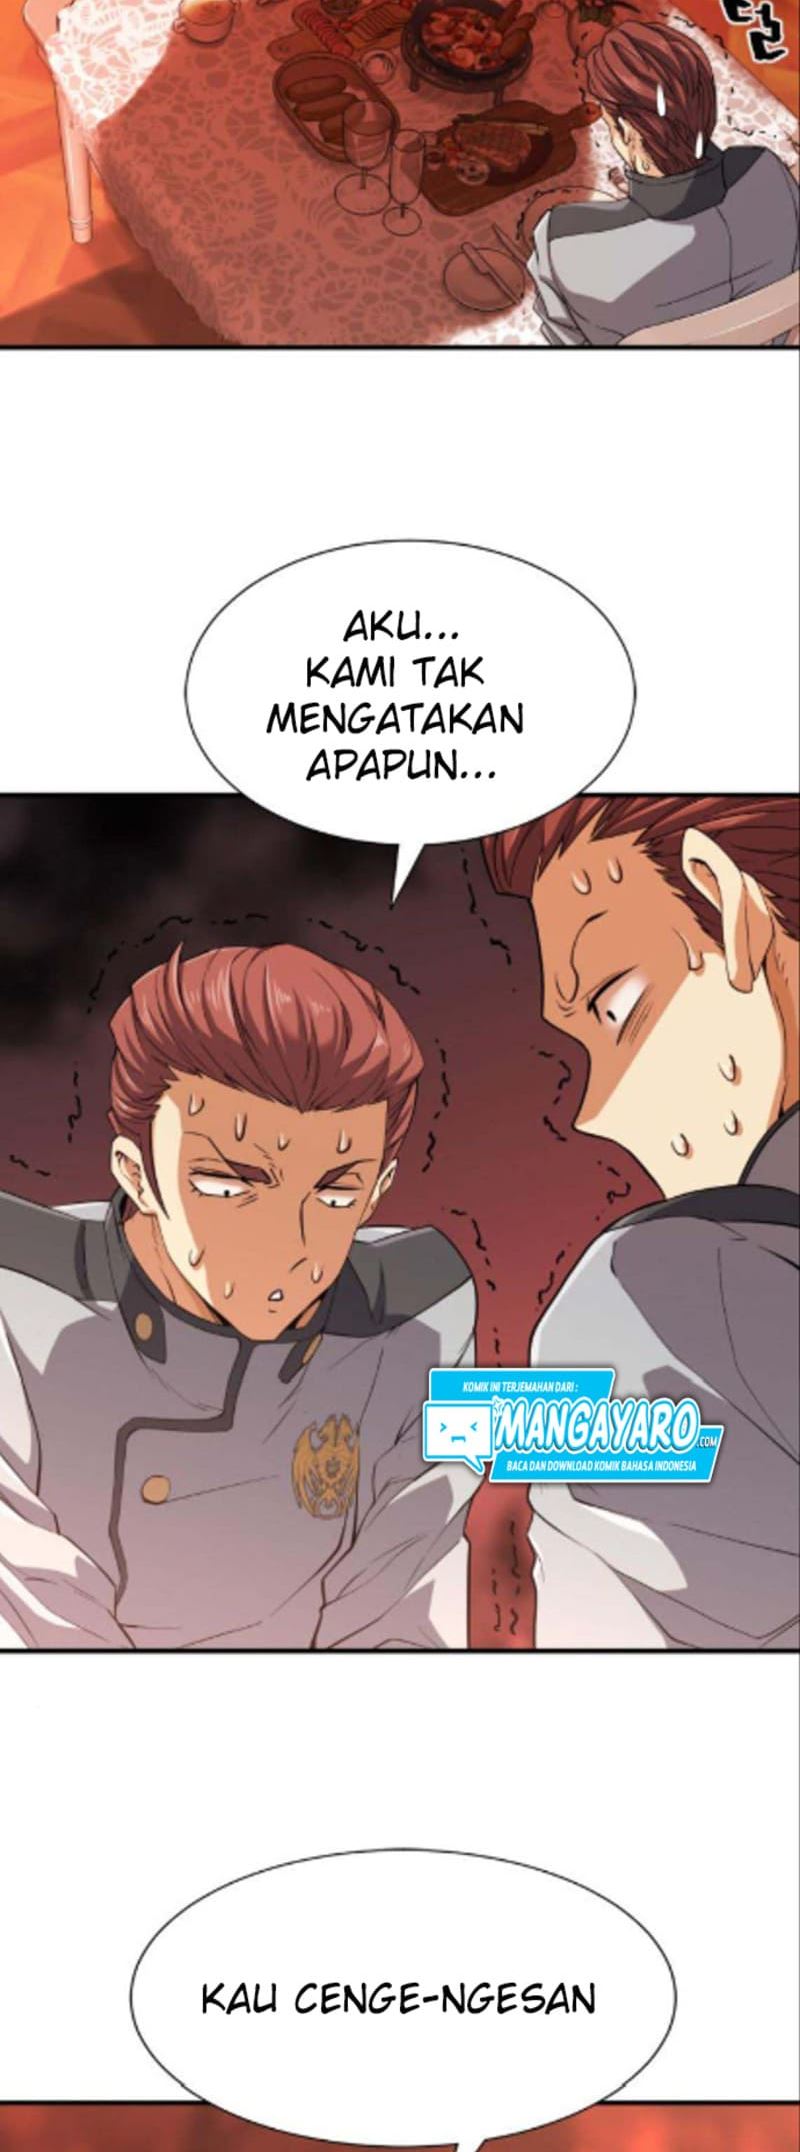 The World&#8217;s Best Engineer Chapter 38